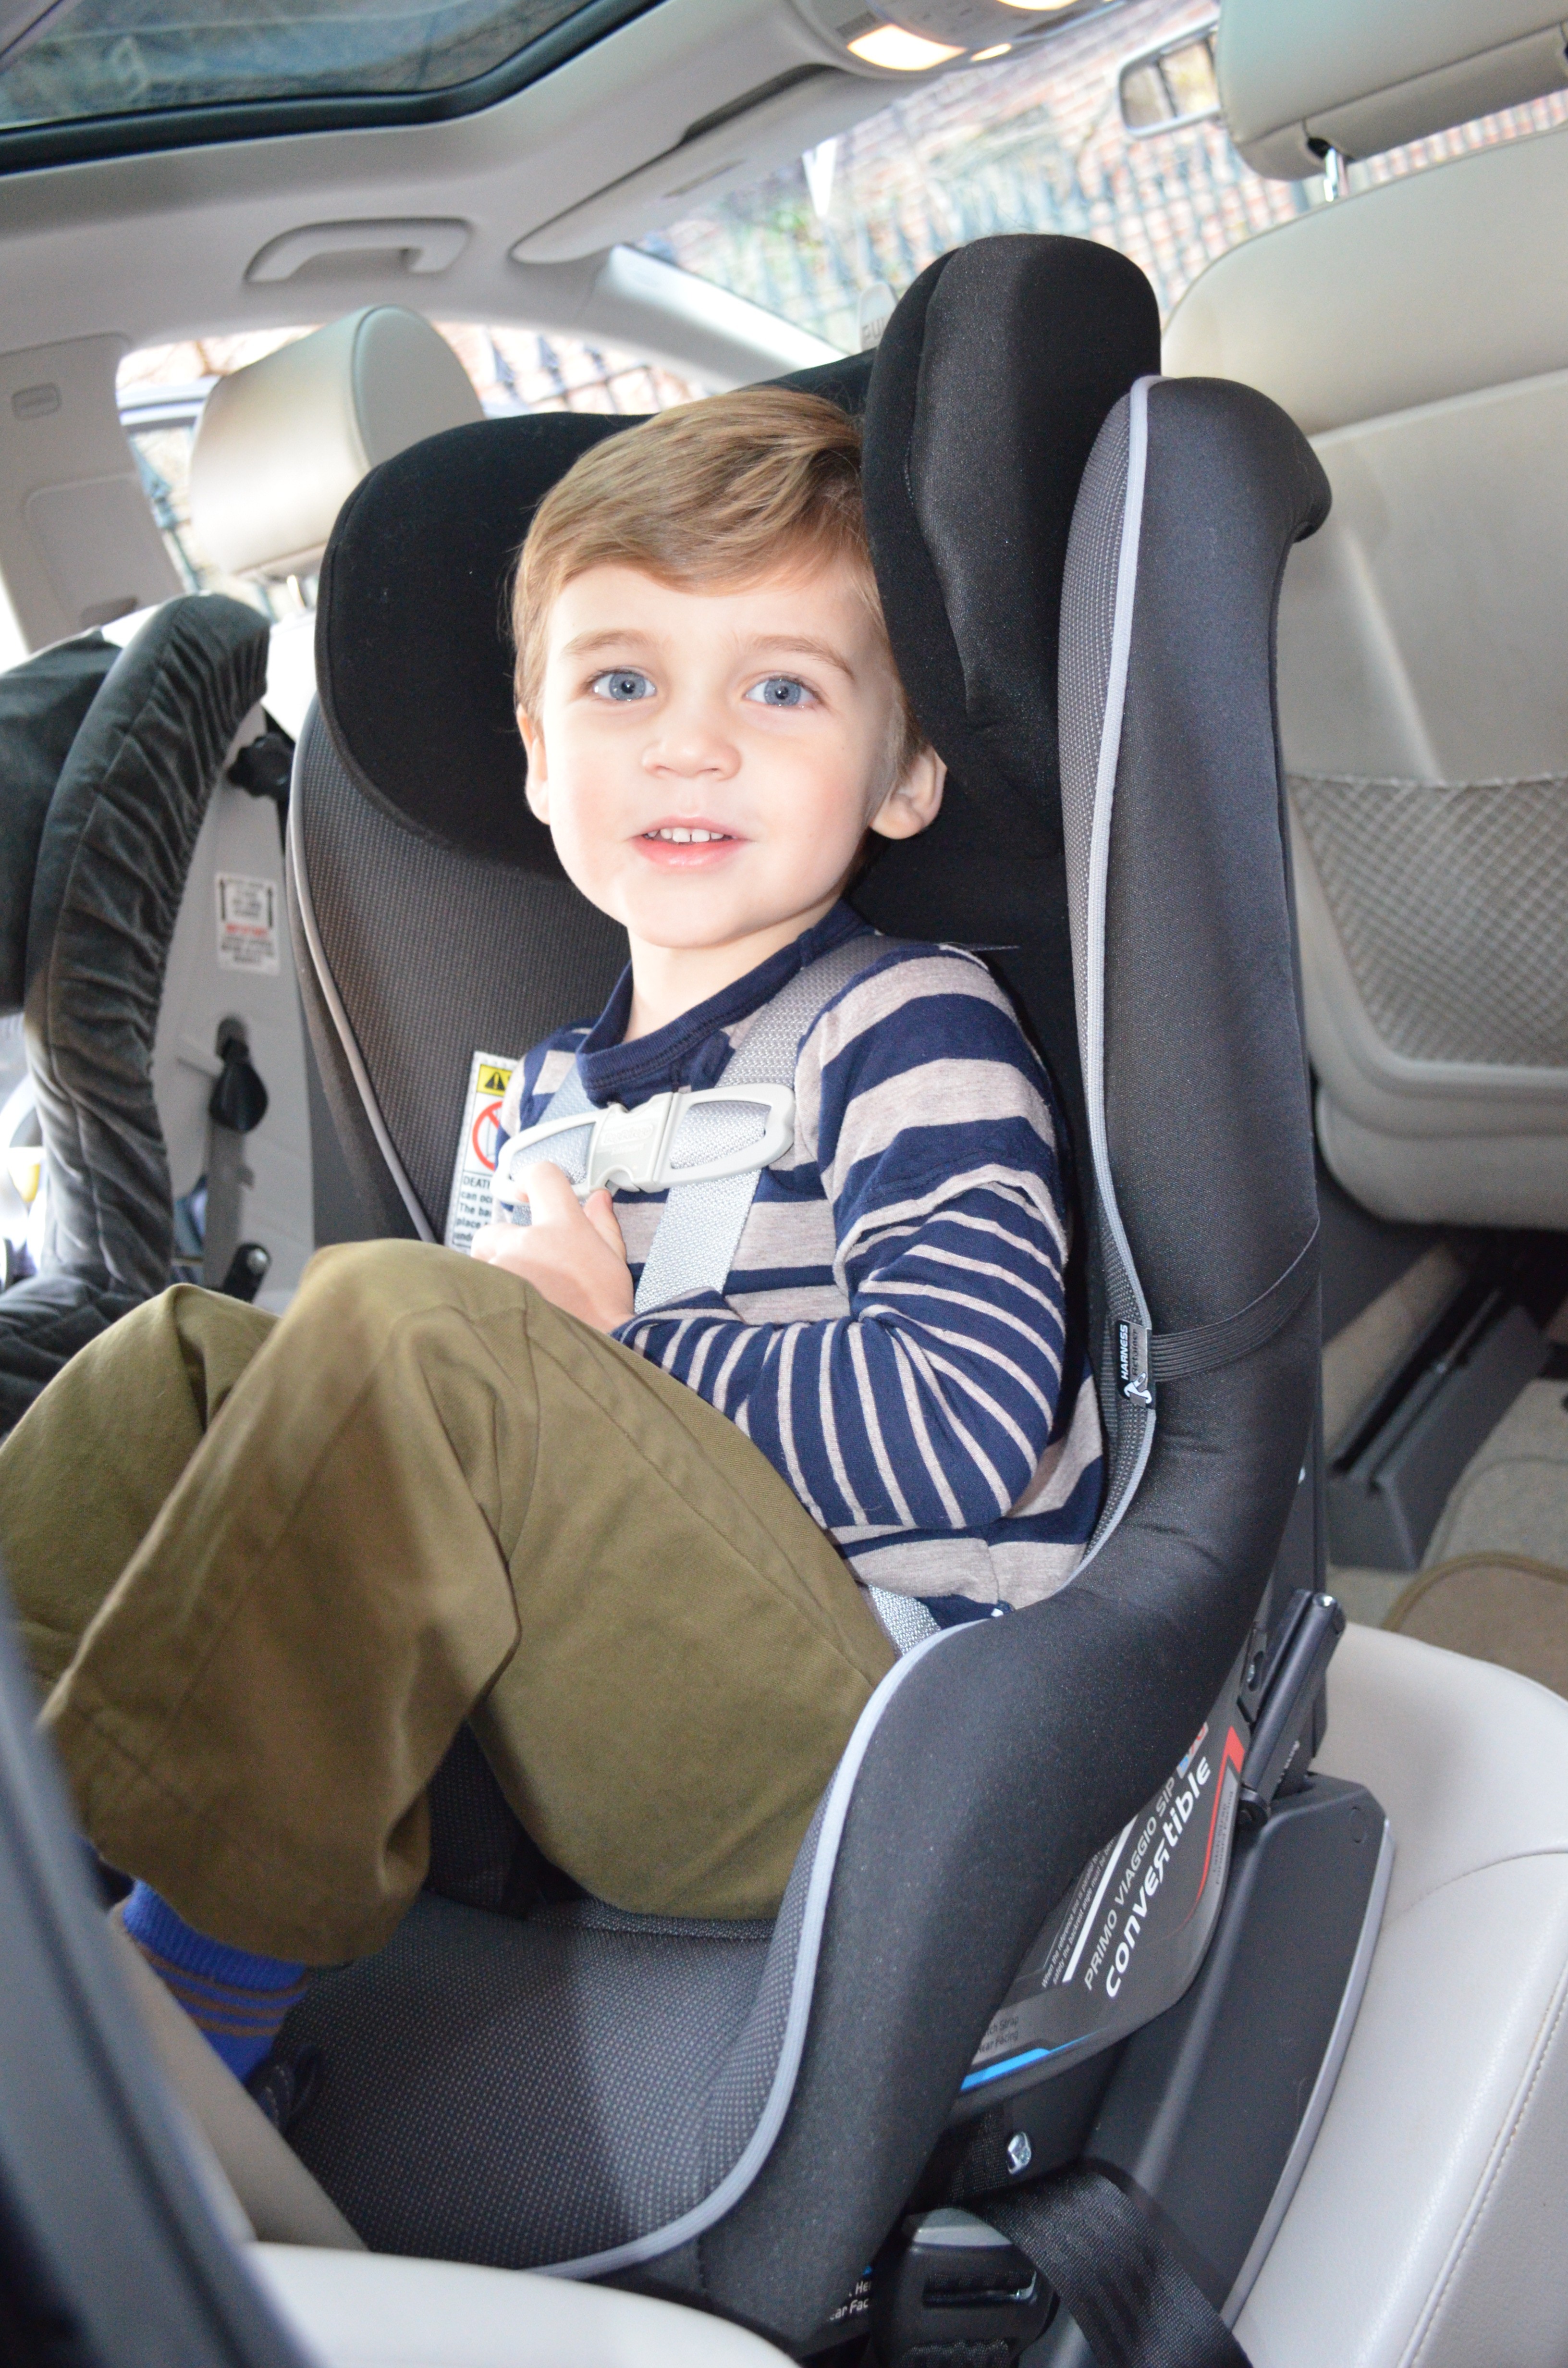 Your Child Turn Forward Facing, When Can You Turn Baby Seat To Forward Facing